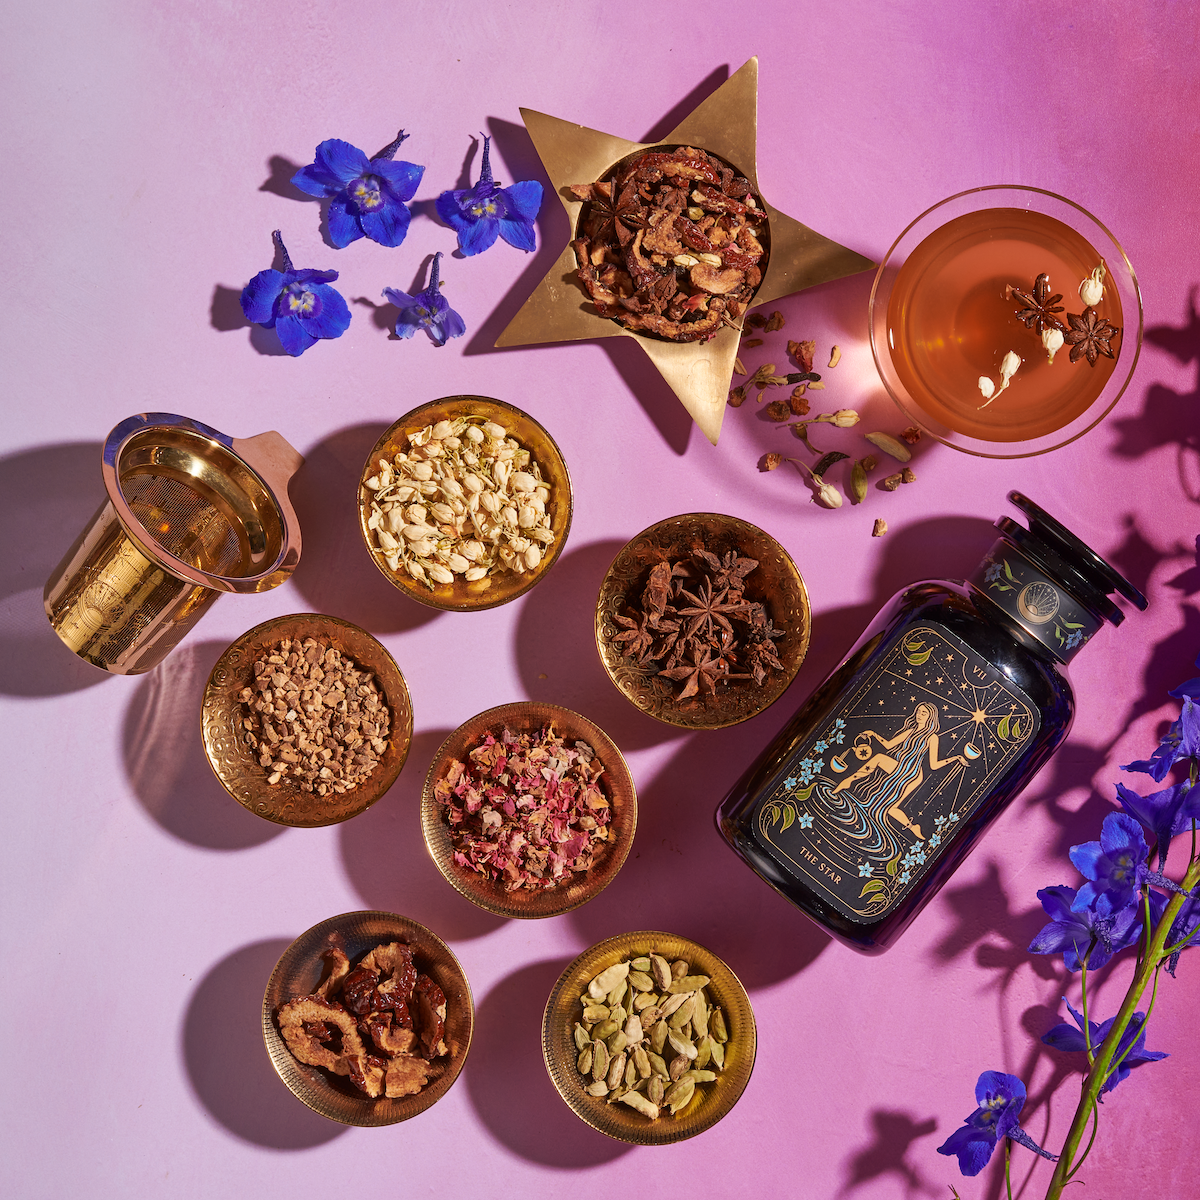 A flat lay featuring a variety of dried herbs and spices in small bowls, a glass teacup with star anise, a gold strainer, a large dark bottle with floral design displaying "LE 5PM," and blue flowers on a pink and purple gradient background. Perfect for enjoying the Monthly Magic 3-Month Tea Subscription Box from Magic Hour.